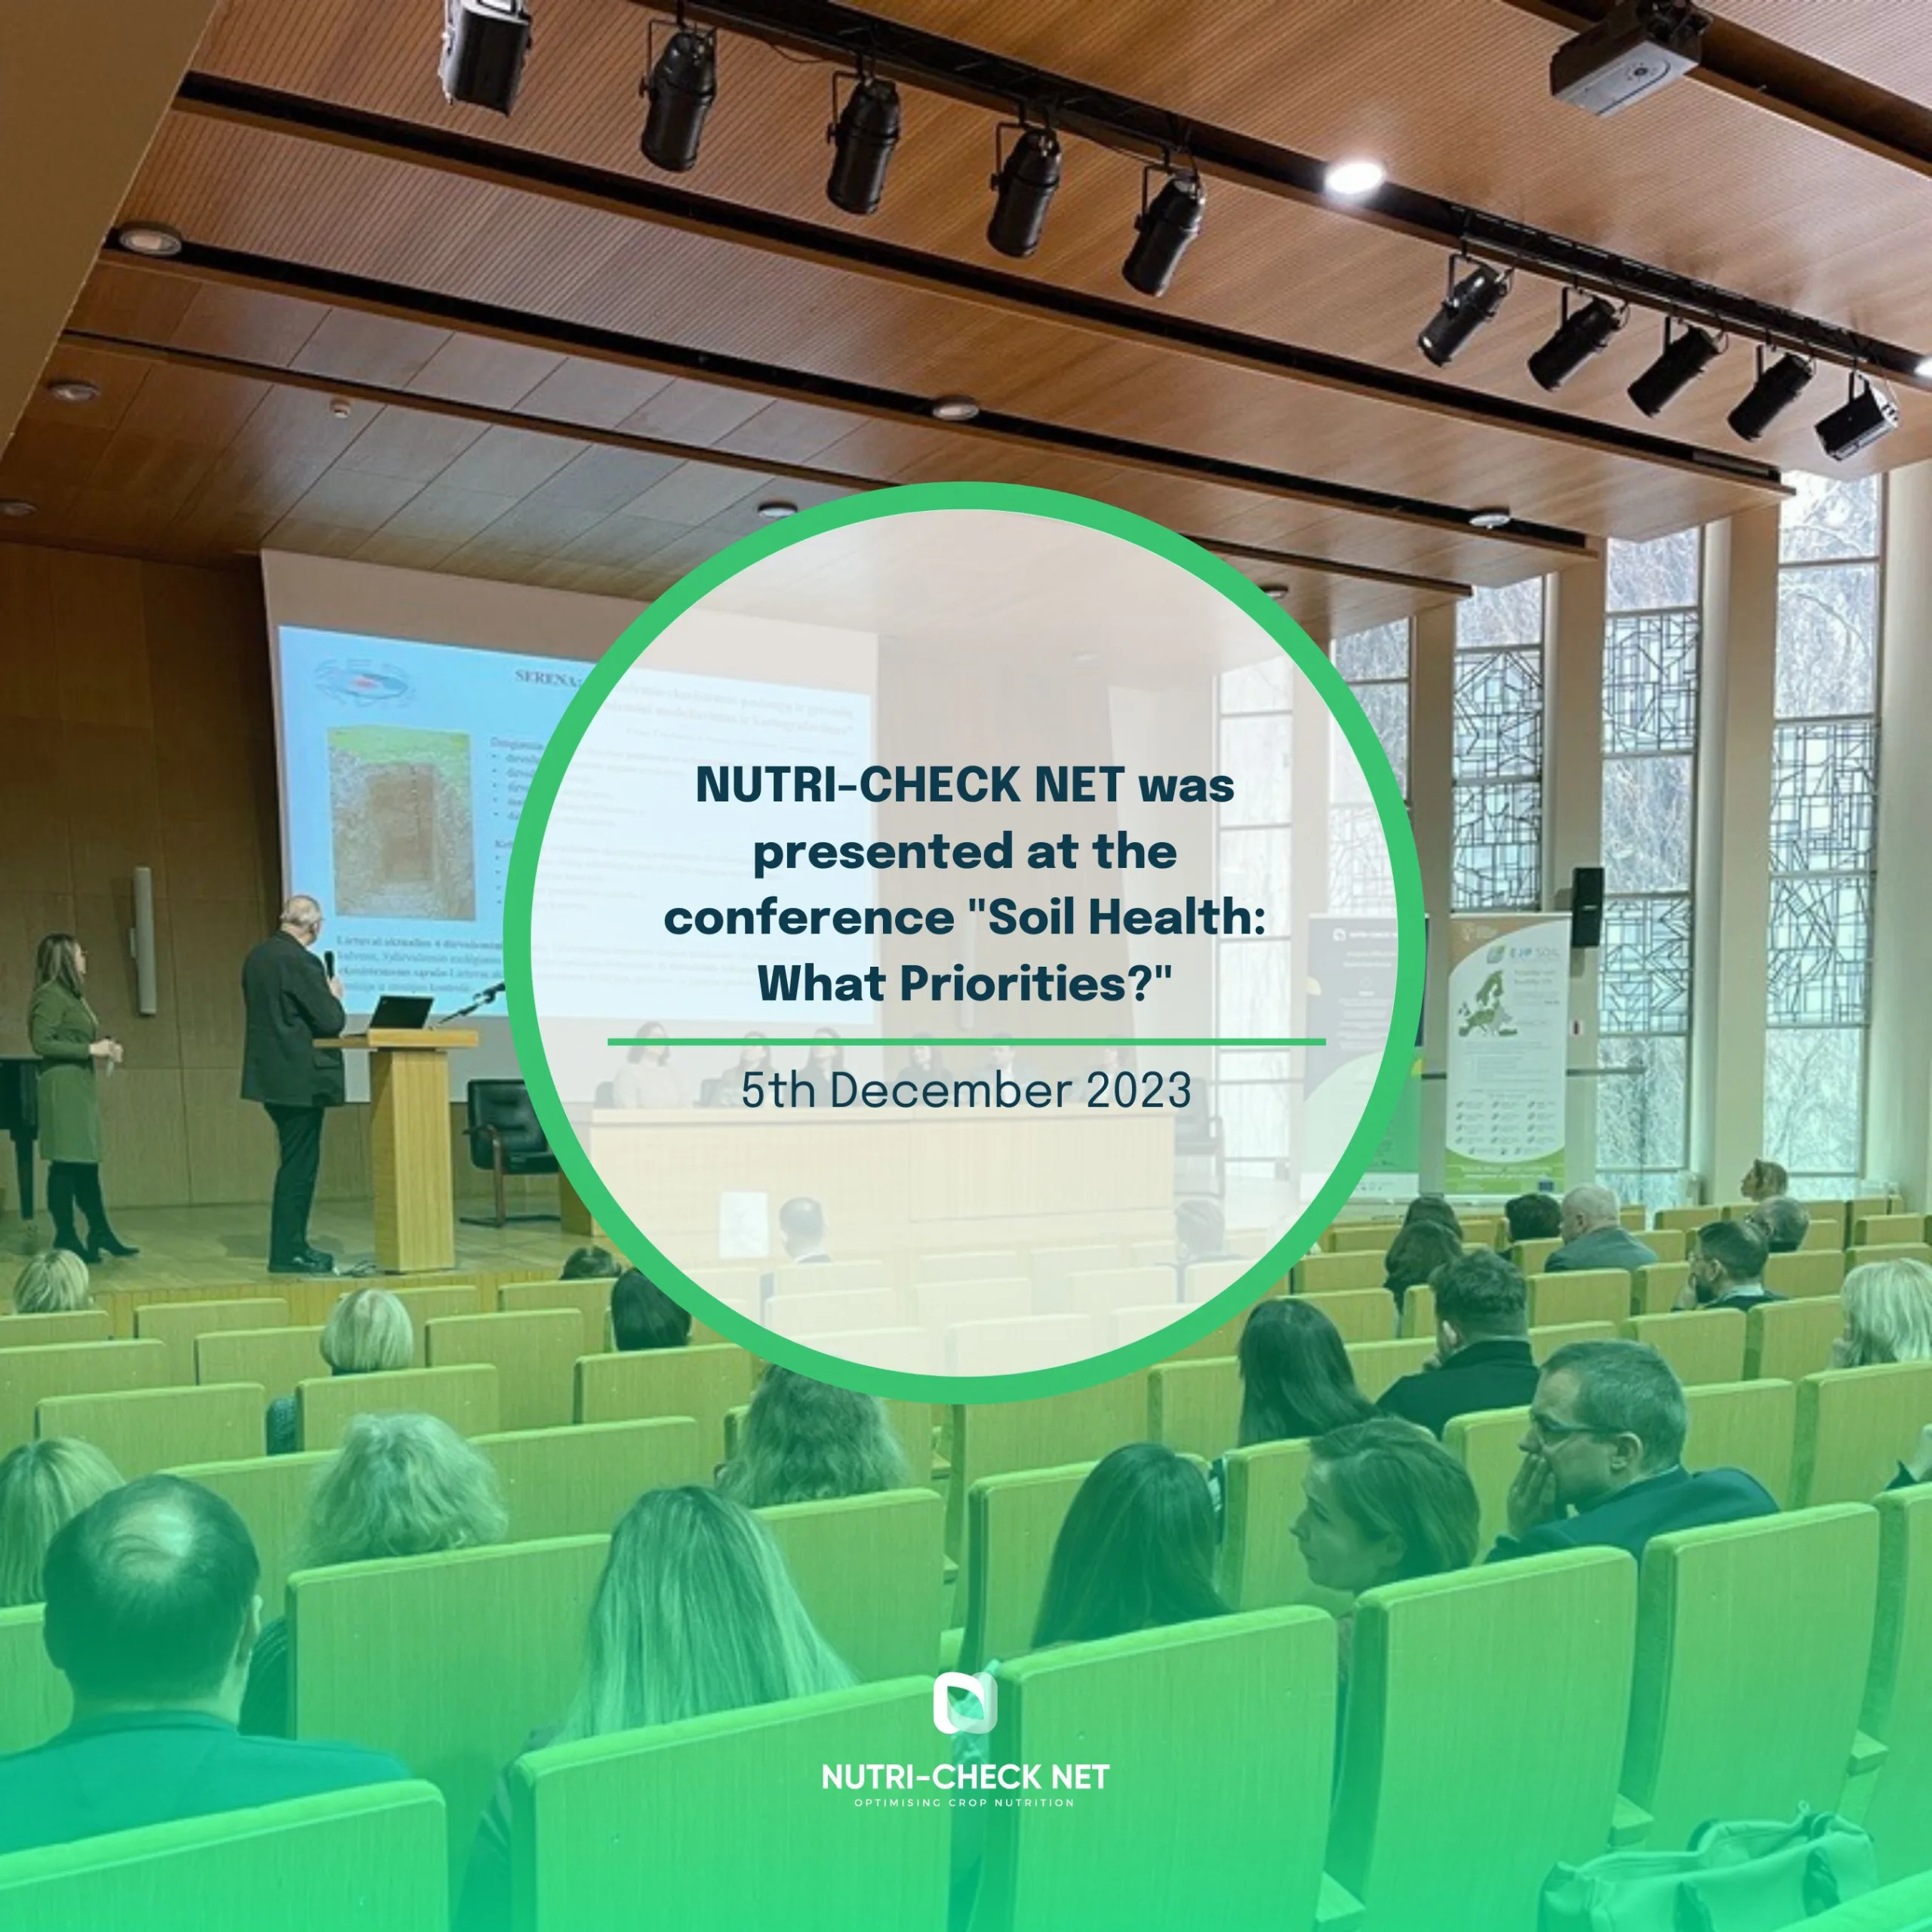 NUTRI-CHECK NET was presented at the conference “Soil Health: What Priorities?”